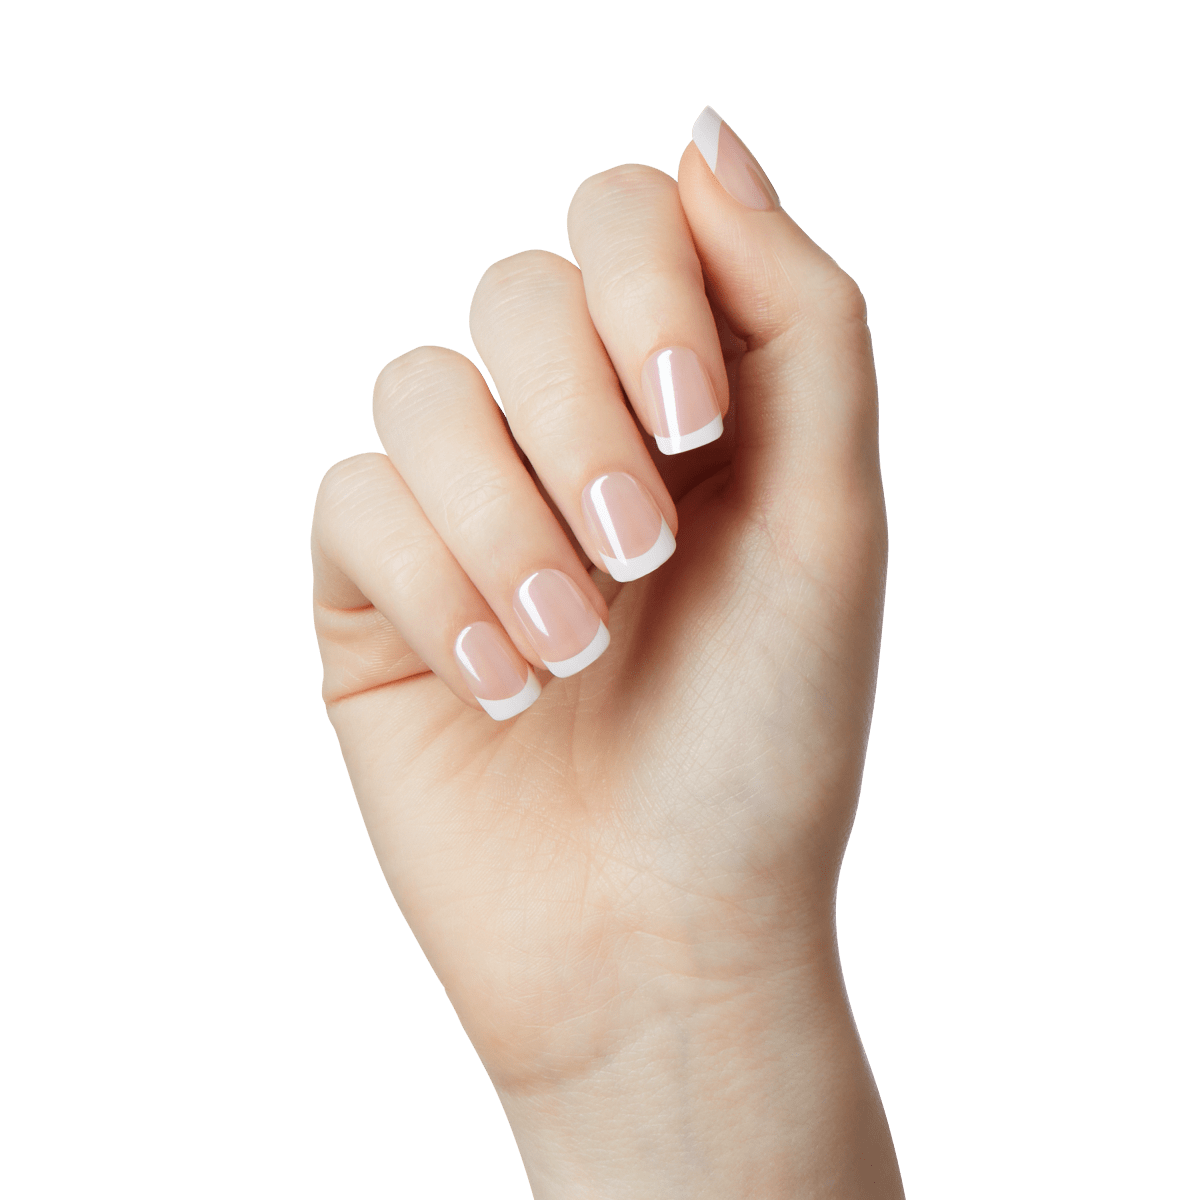 10 Easy Steps to Give Yourself A Non-Toxic Home Manicure